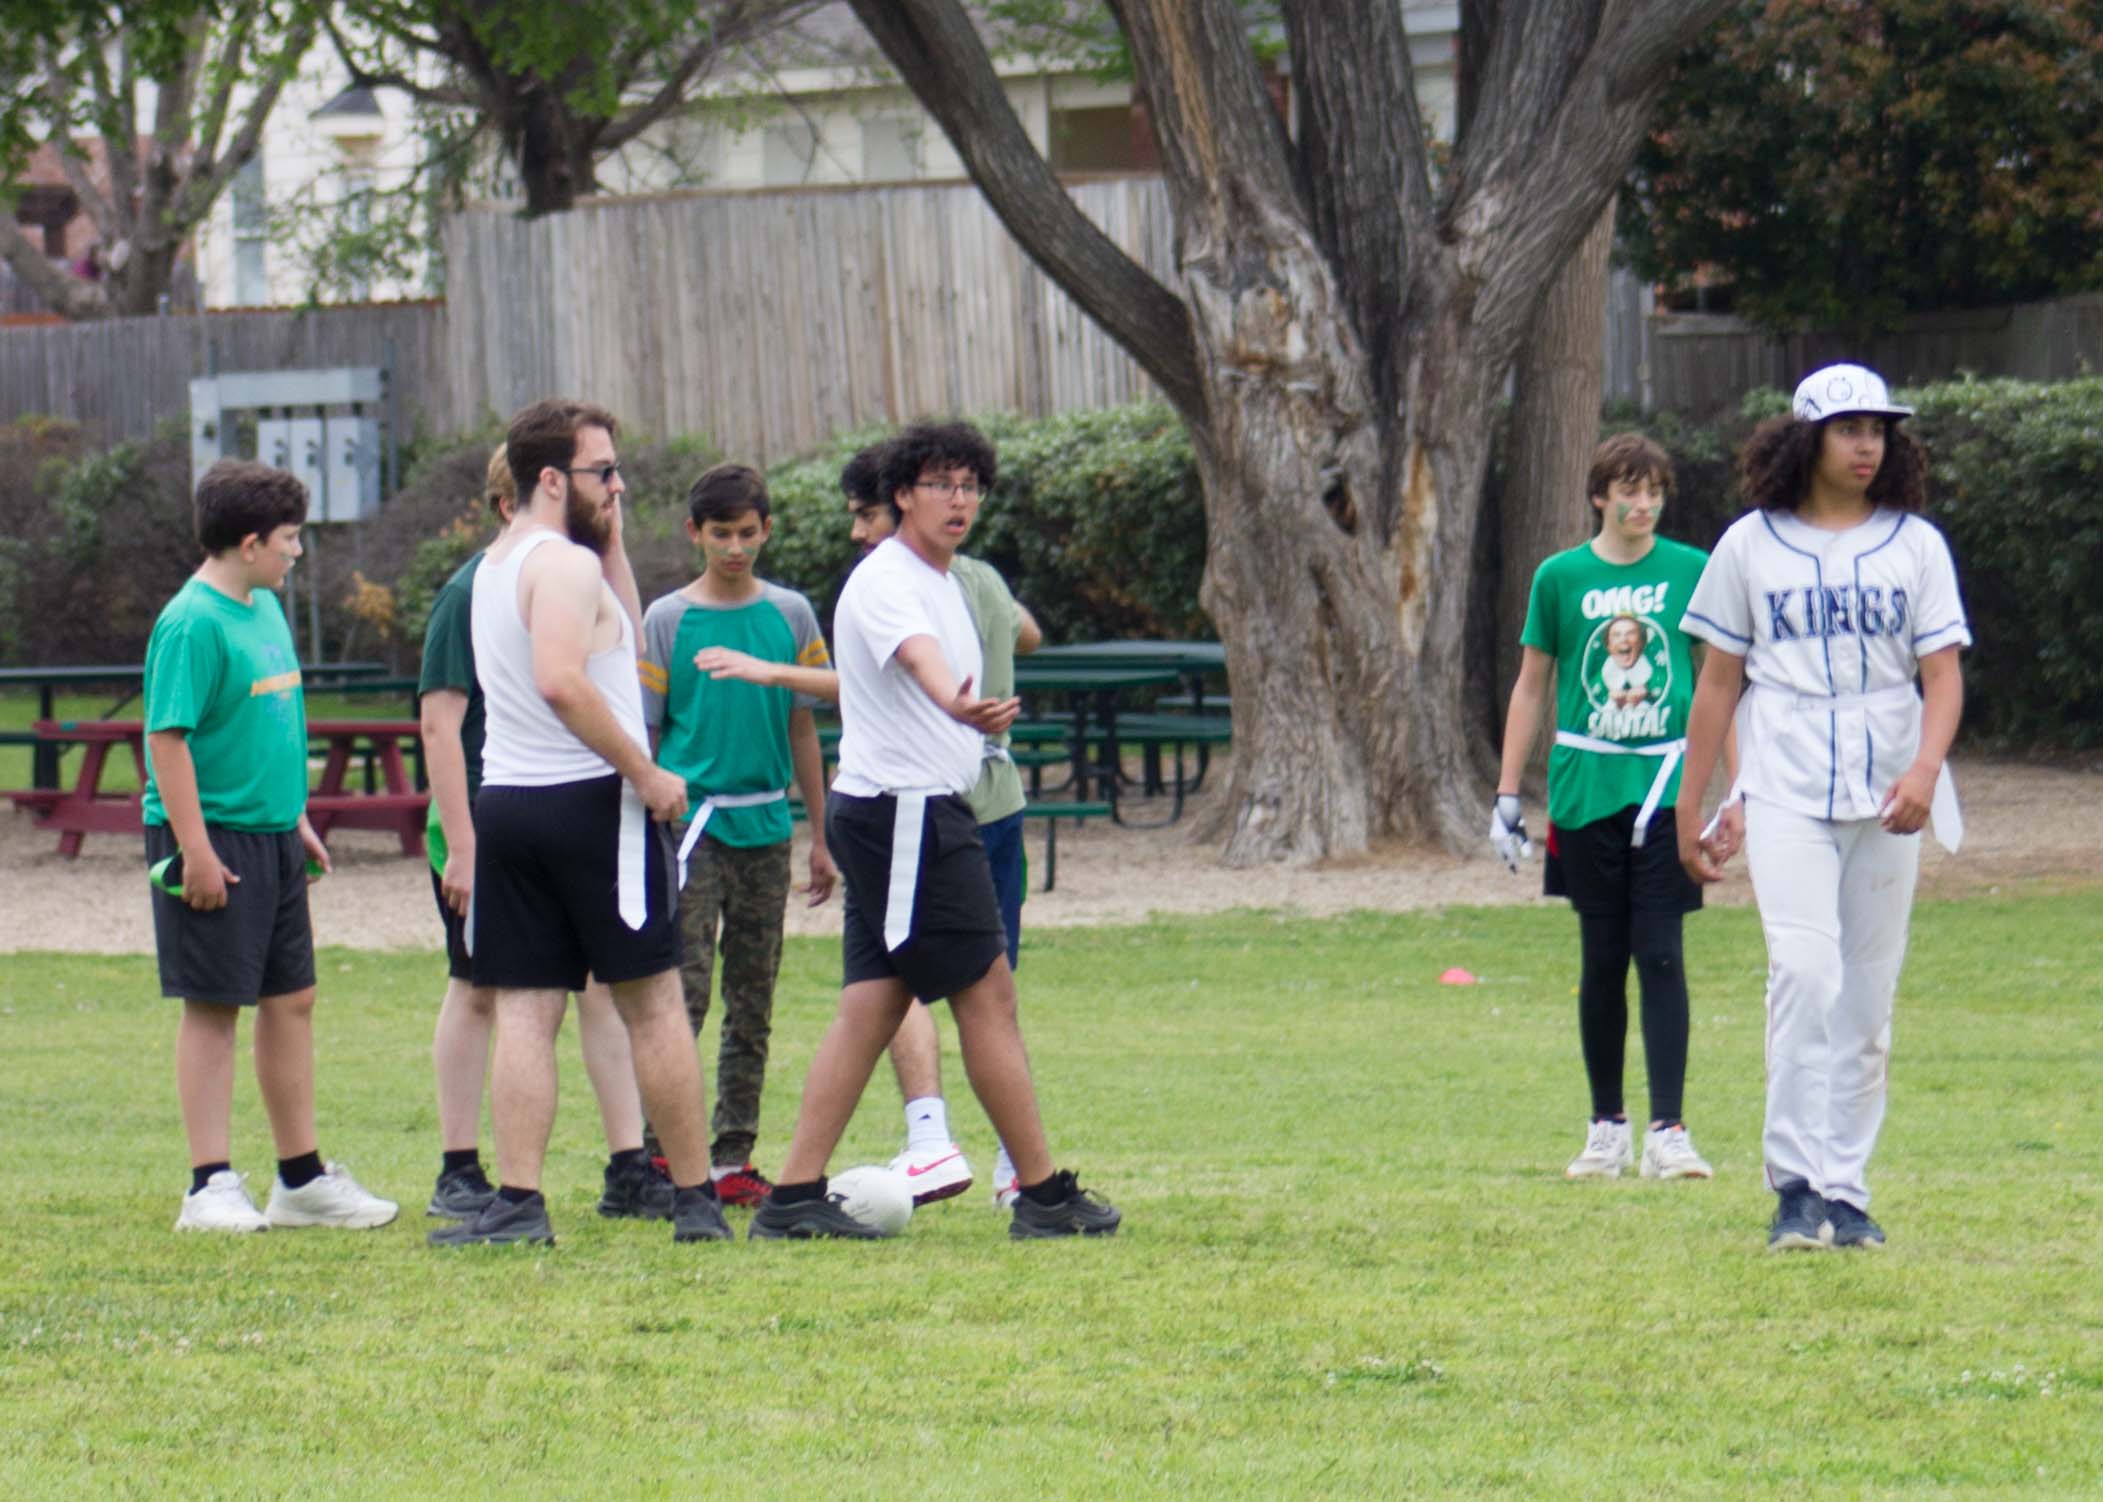 22-23 Spring Flag Football.  Thanks, Melissa Bozeman, for sharing the pictures.